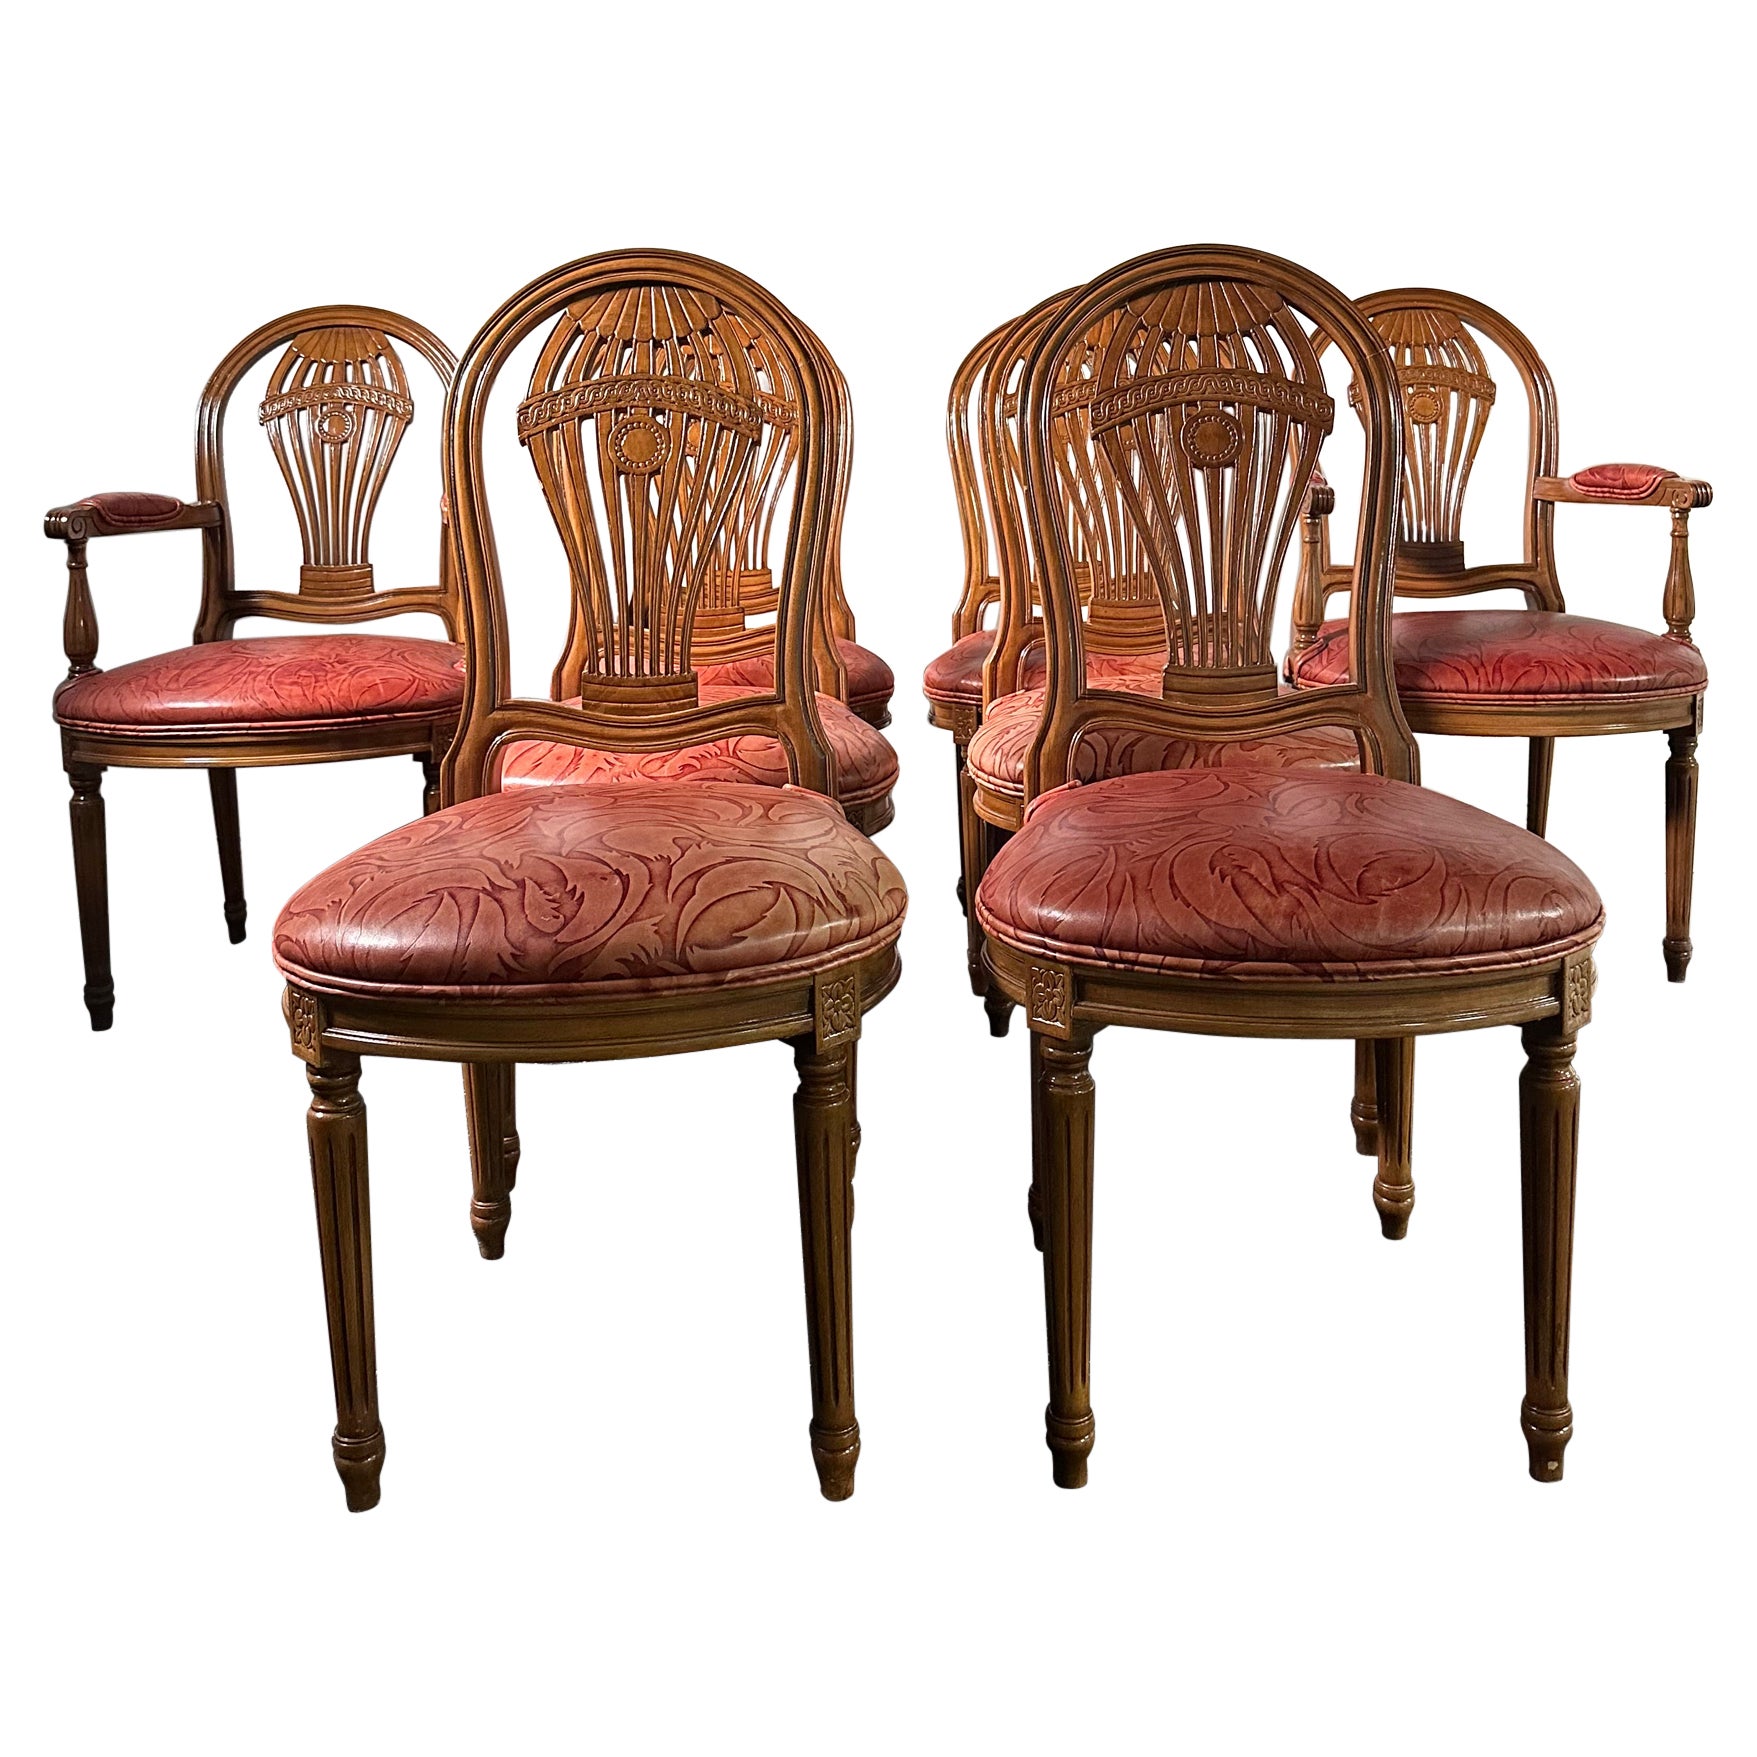 Set of 8 Balloon Back Carved Wood Dining Chairs with Edelman Leather Seats